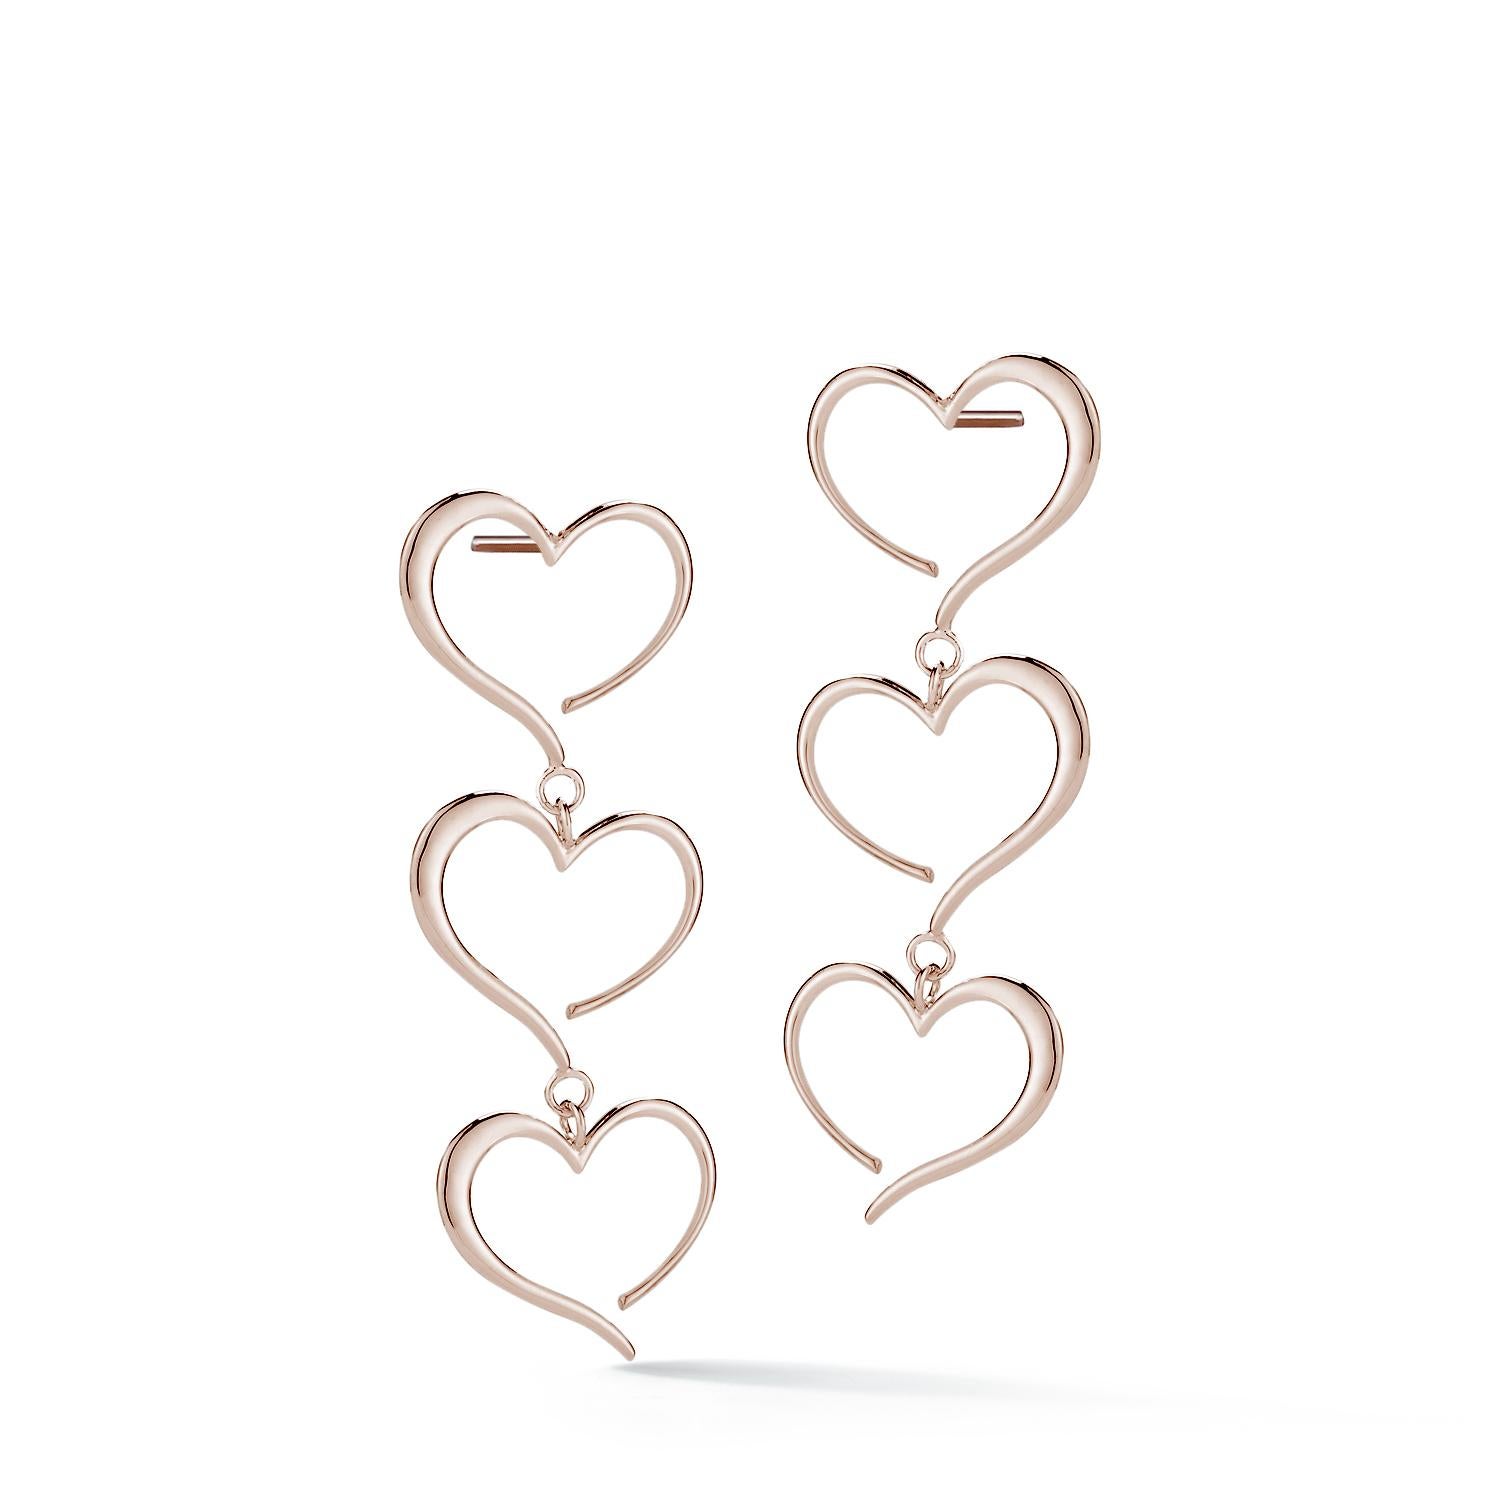 Designed in NYC

24k Yellow Gold Vermeil Triple Heart Dangle Earrings. On the road to charting your own path, the only rule is to follow your heart. Triple heart dangle earrings:

Sterling silver in 24k yellow gold vermeil 
High-polish